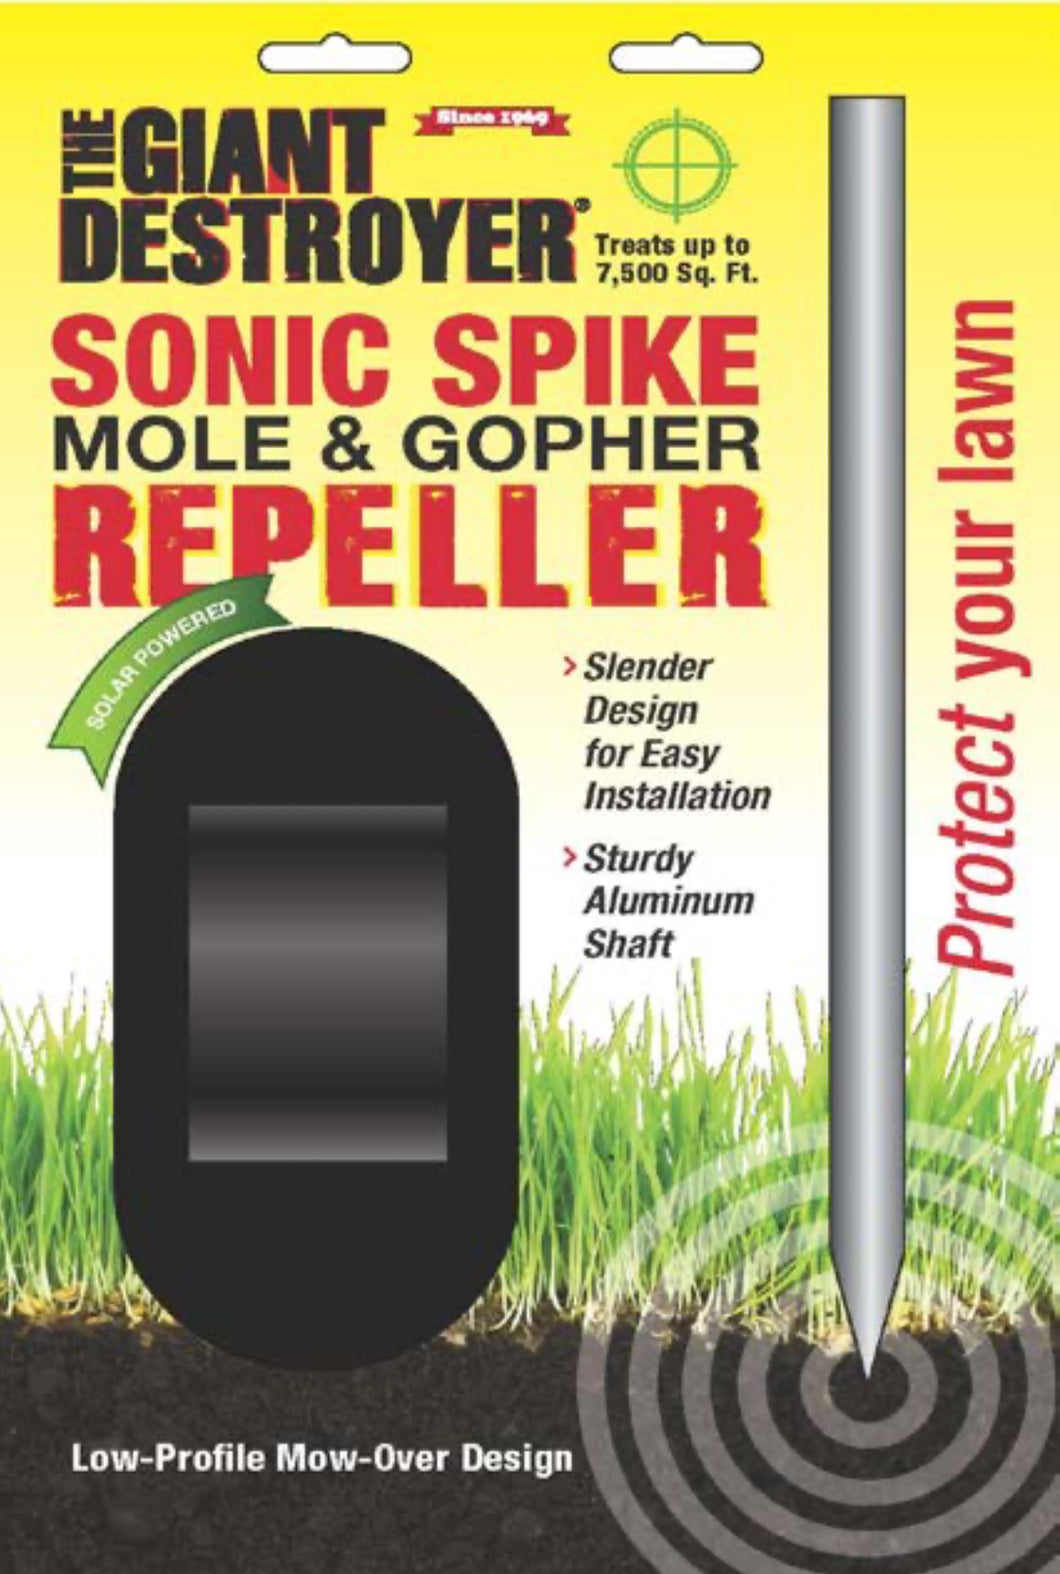 THE GIANT DESTROYER Sonic Spike Repeller (for moles and gophers)